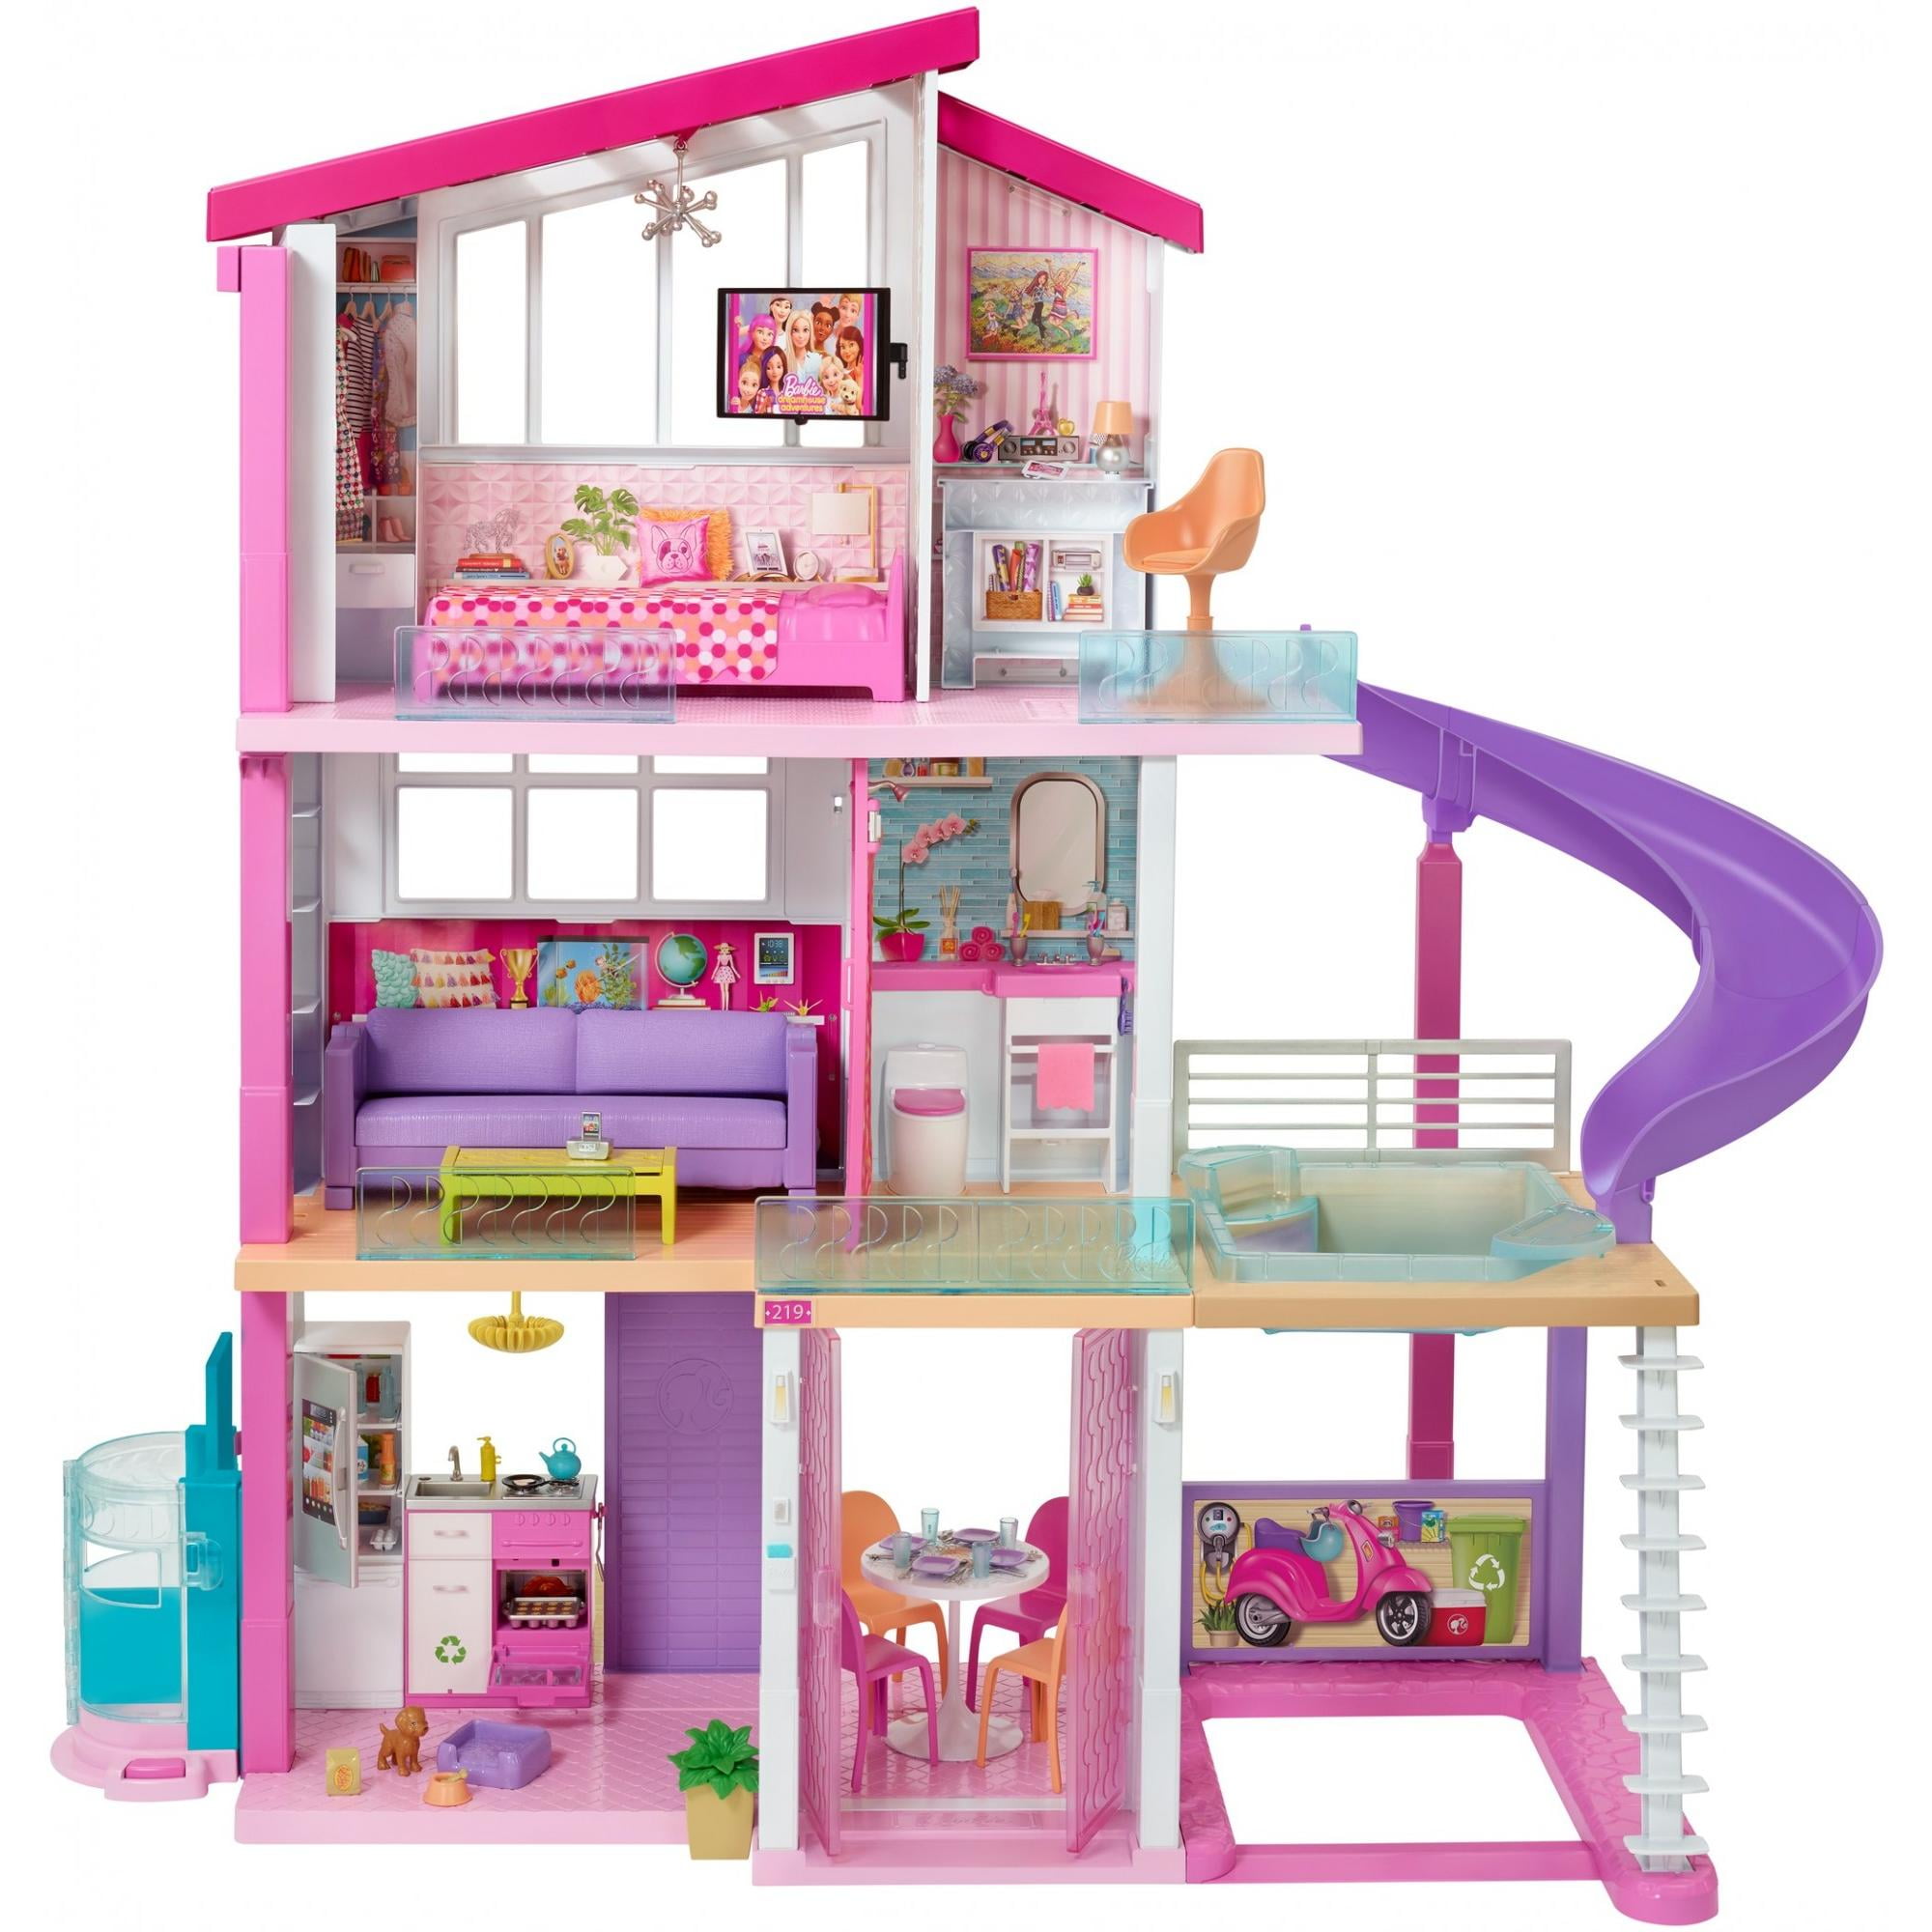 Modern Pink Barbie Dream House Home Play Room Set Girls Miniature Toy Doll House 